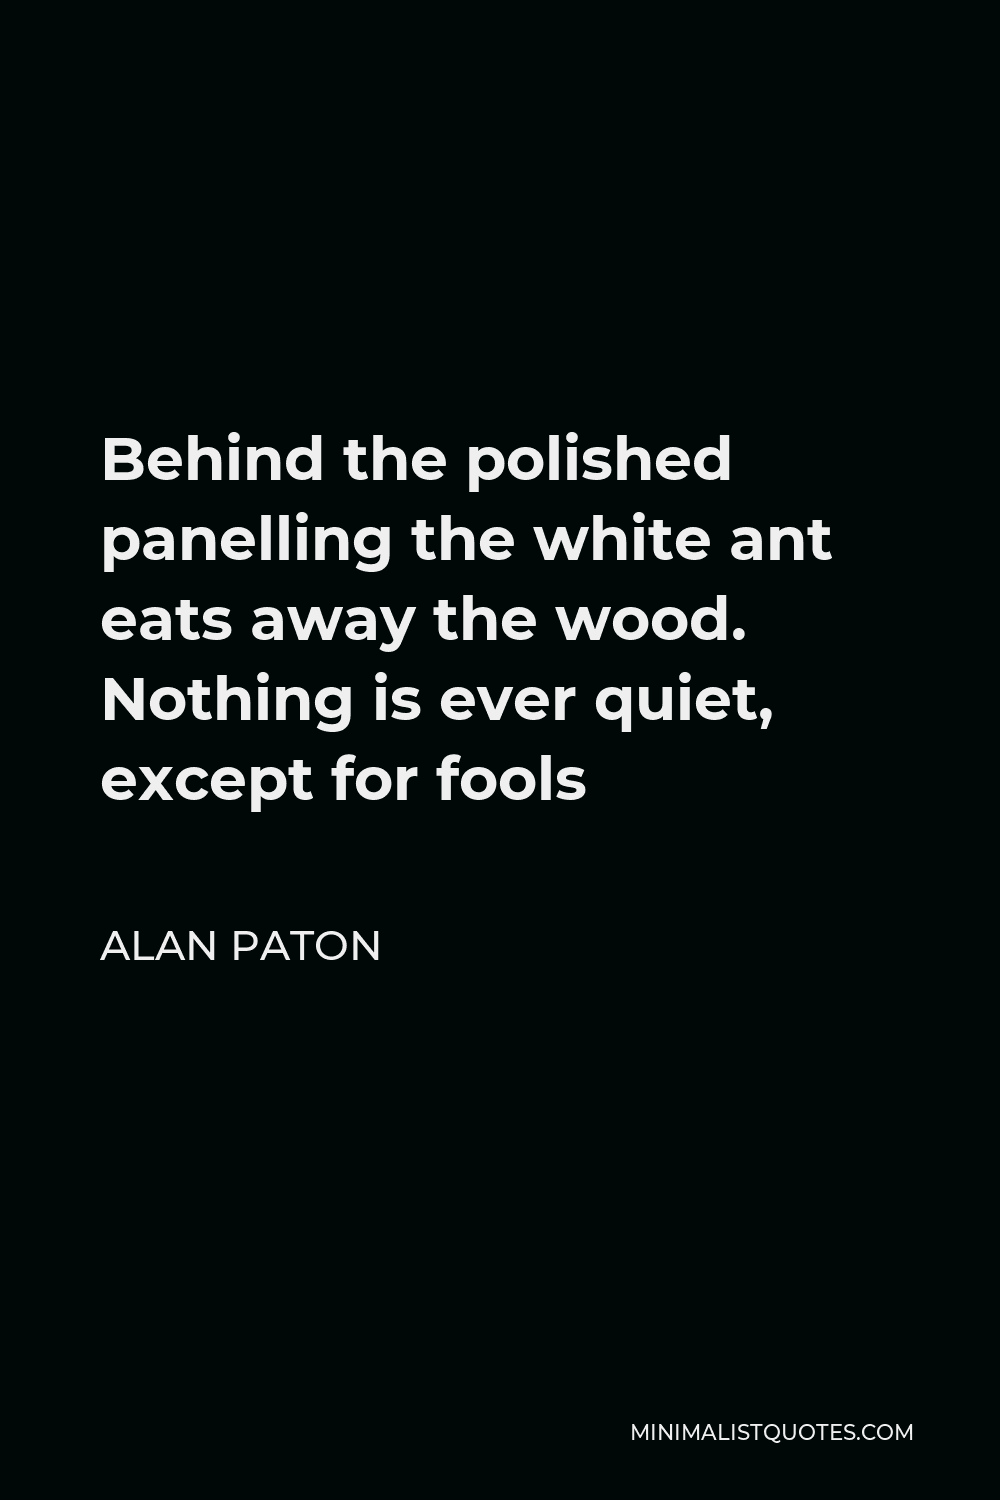 Alan Paton Quote - Behind the polished panelling the white ant eats away the wood. Nothing is ever quiet, except for fools